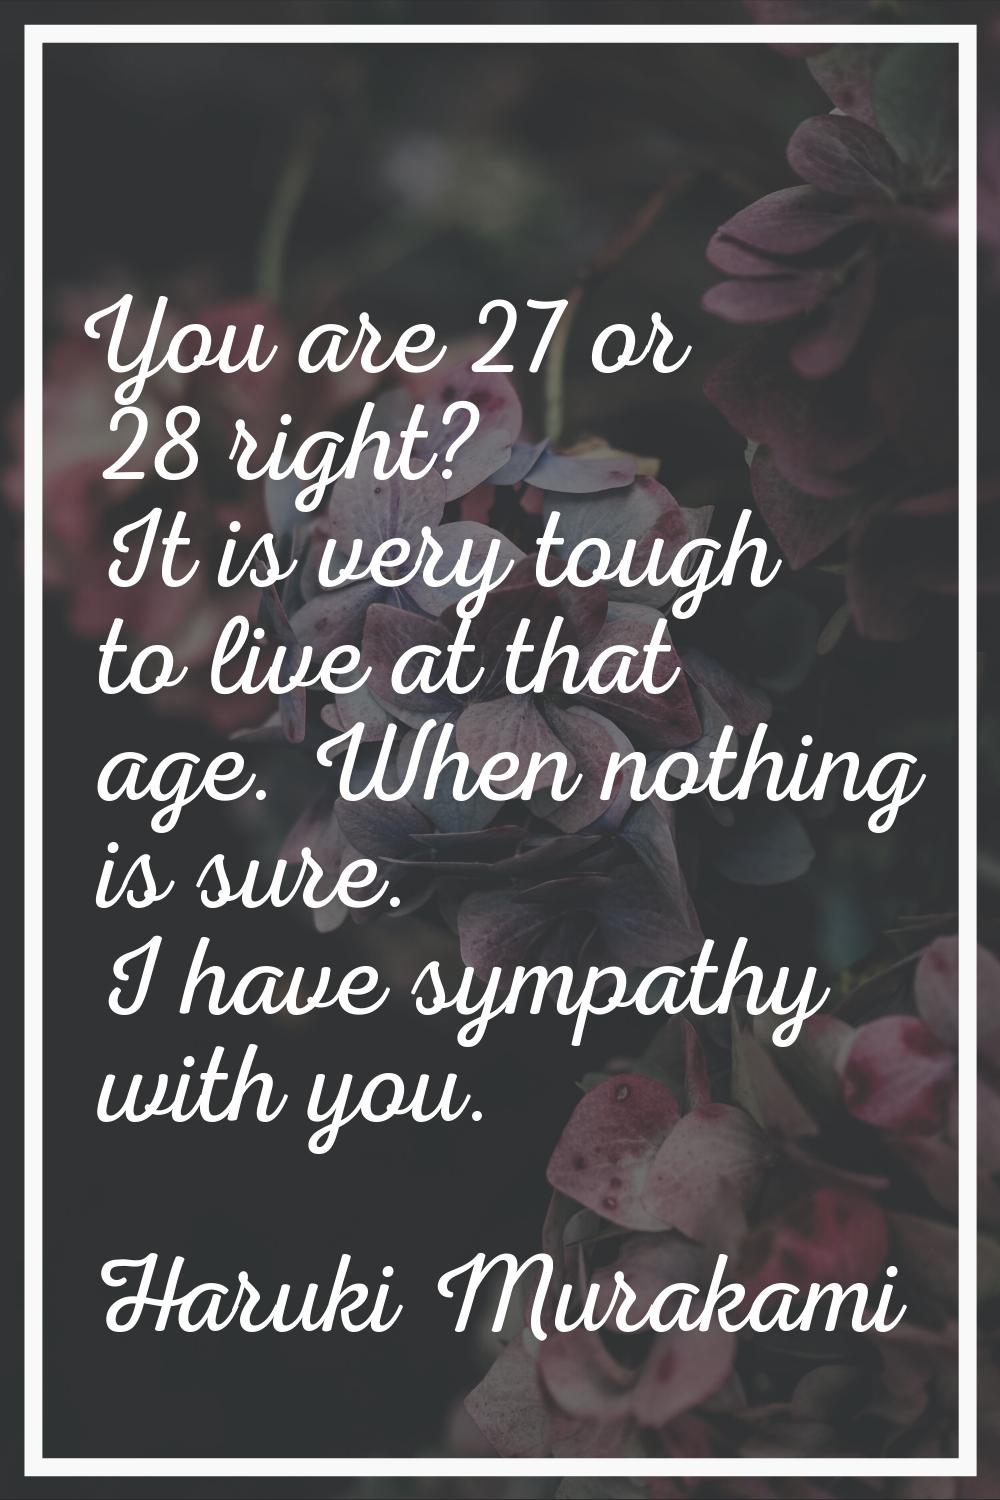 You are 27 or 28 right? It is very tough to live at that age. When nothing is sure. I have sympathy